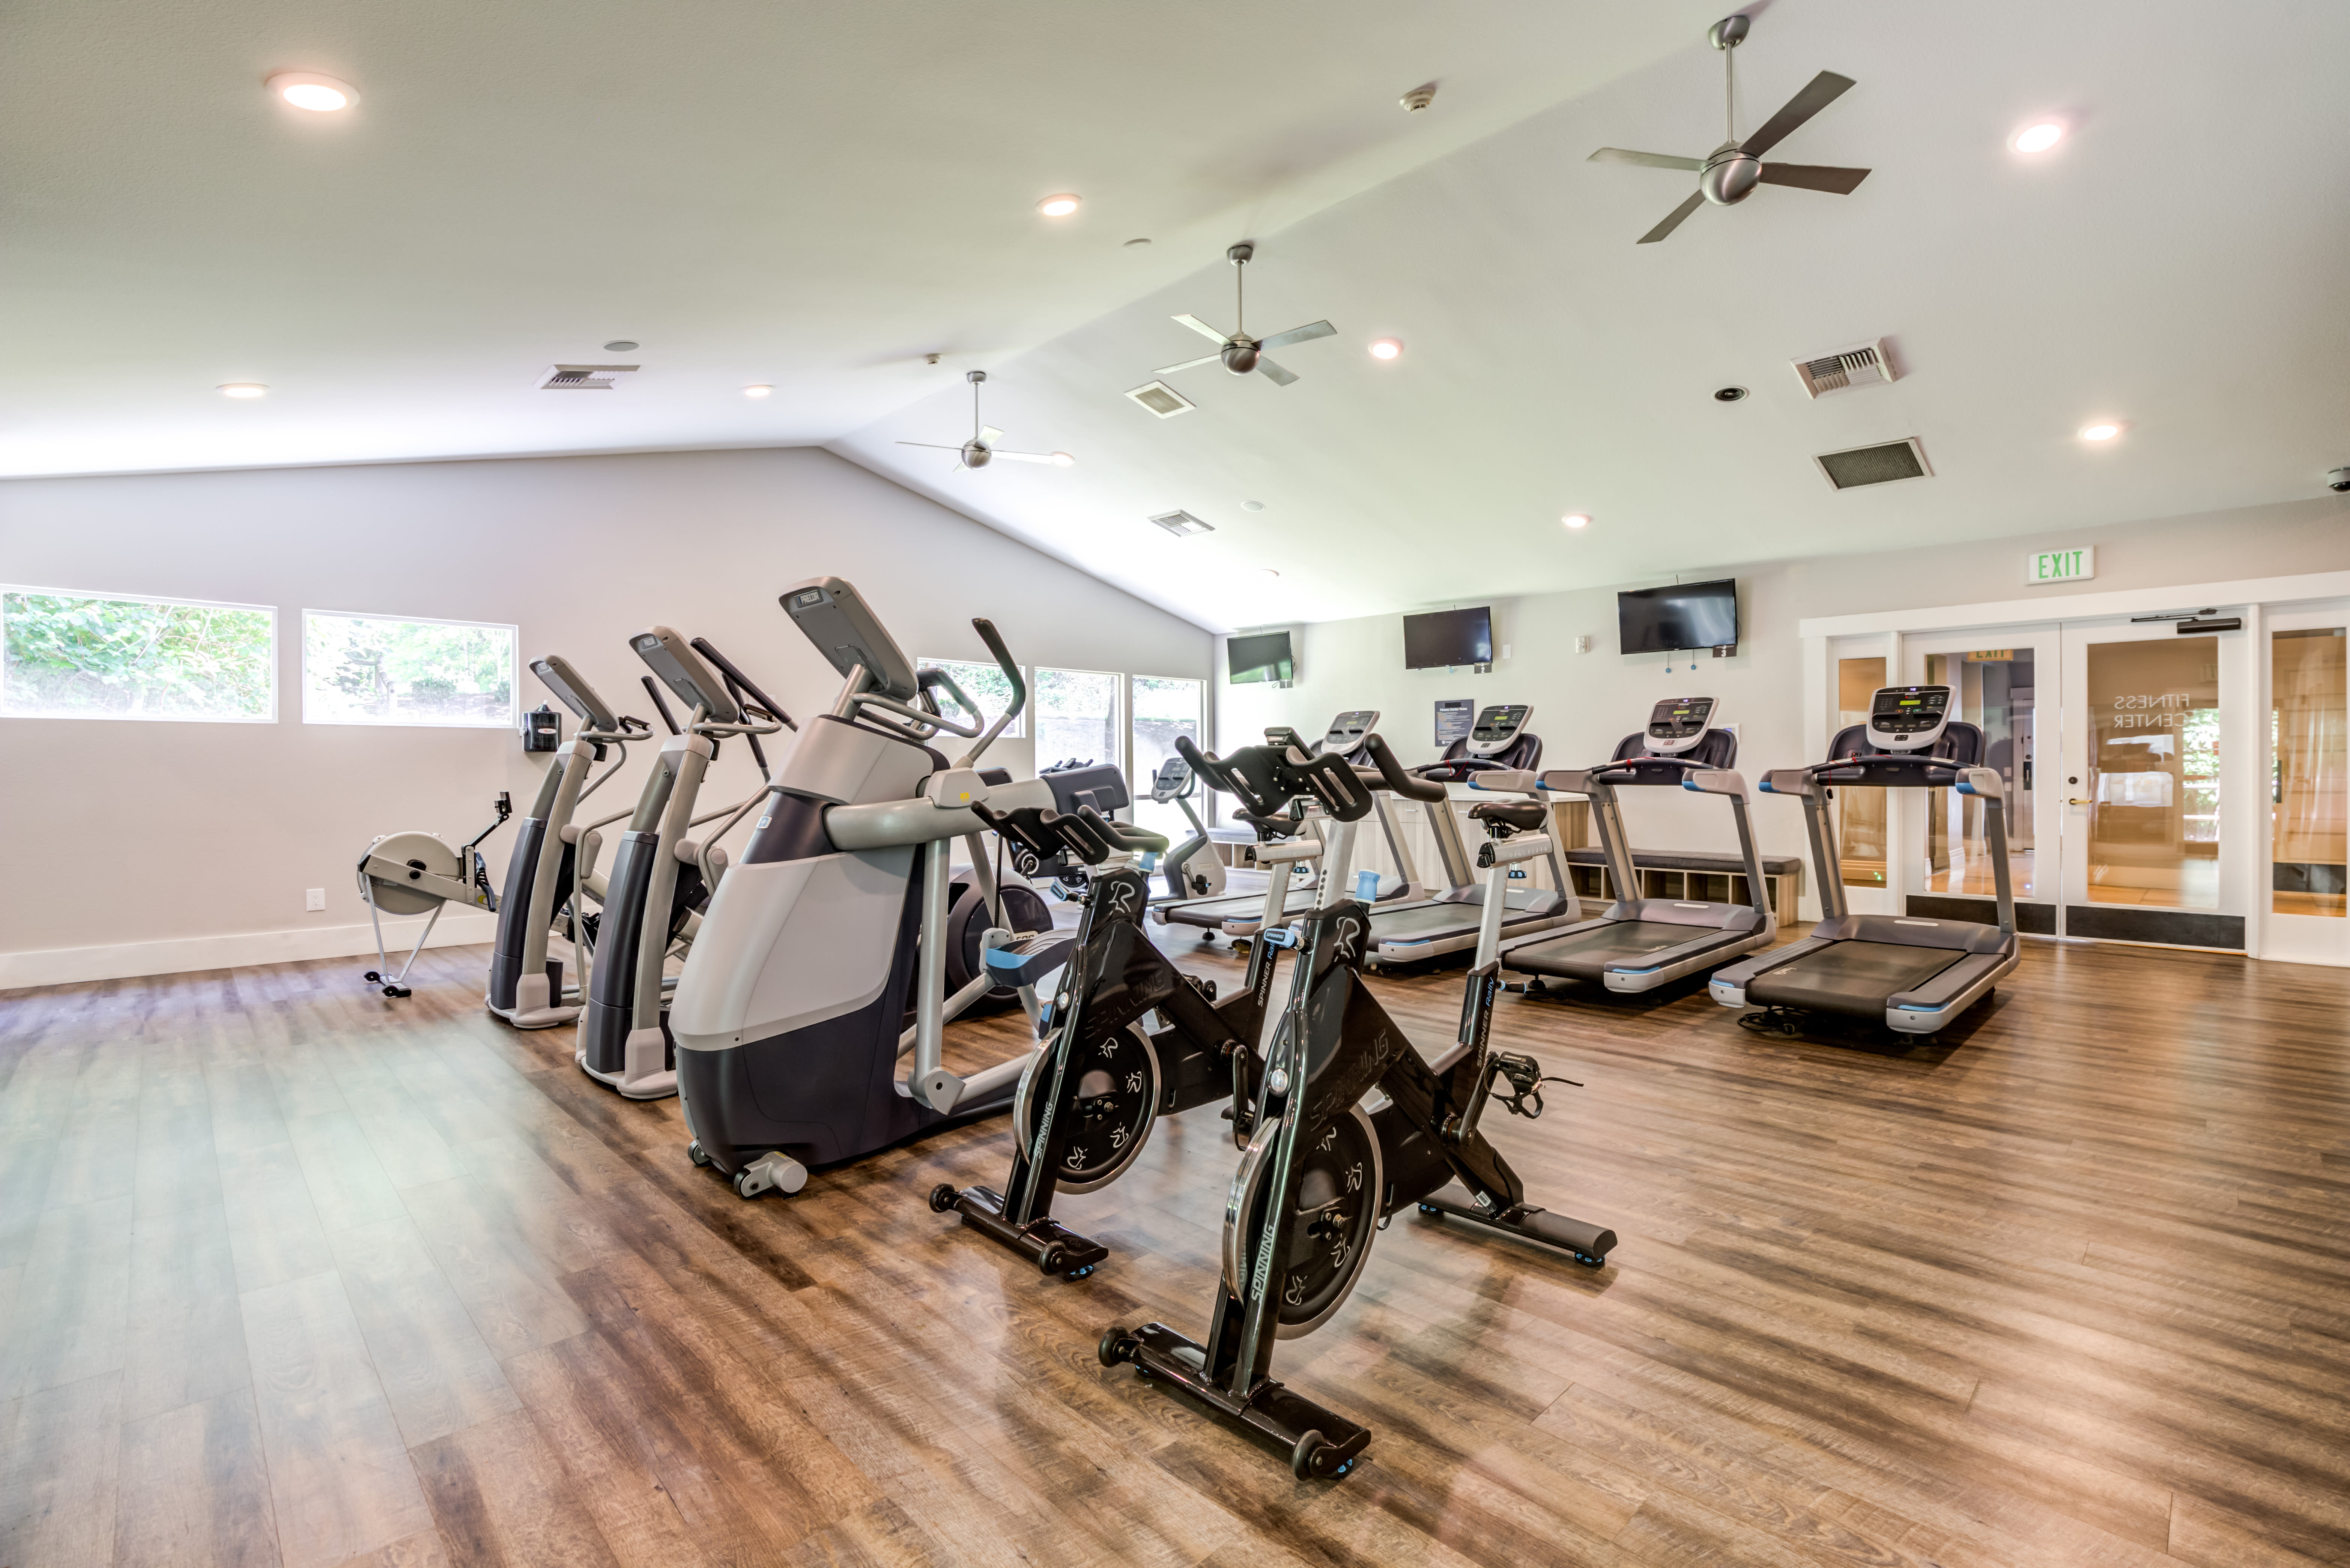 Fitness center at The Preserve at Forbes Creek in Kirkland, Washington